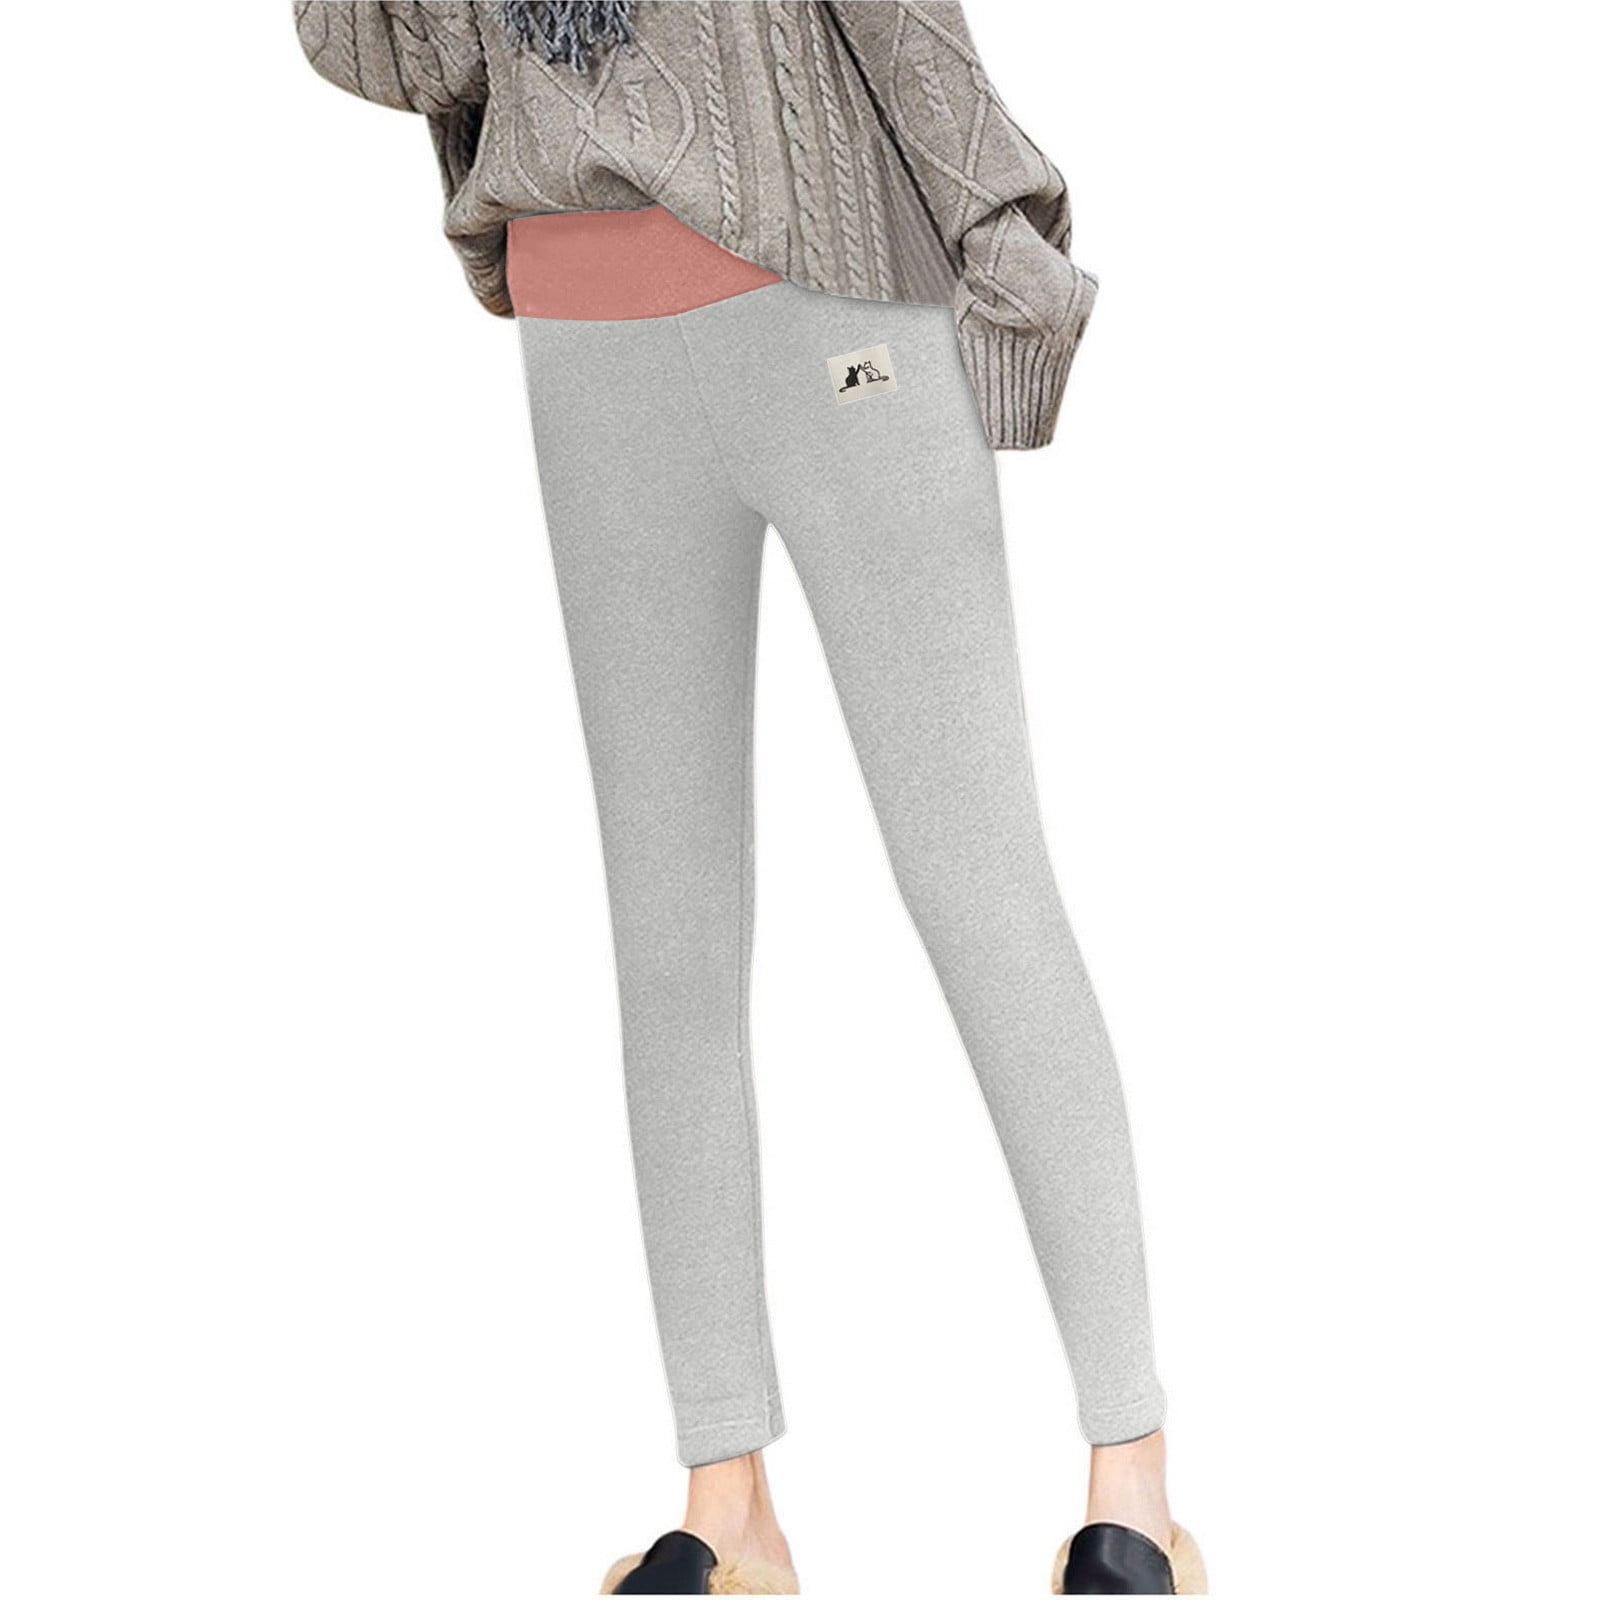 Plus size thermal fleece thick top and leggings set (EXTRA BIG SIZE) –  Pluspreorder